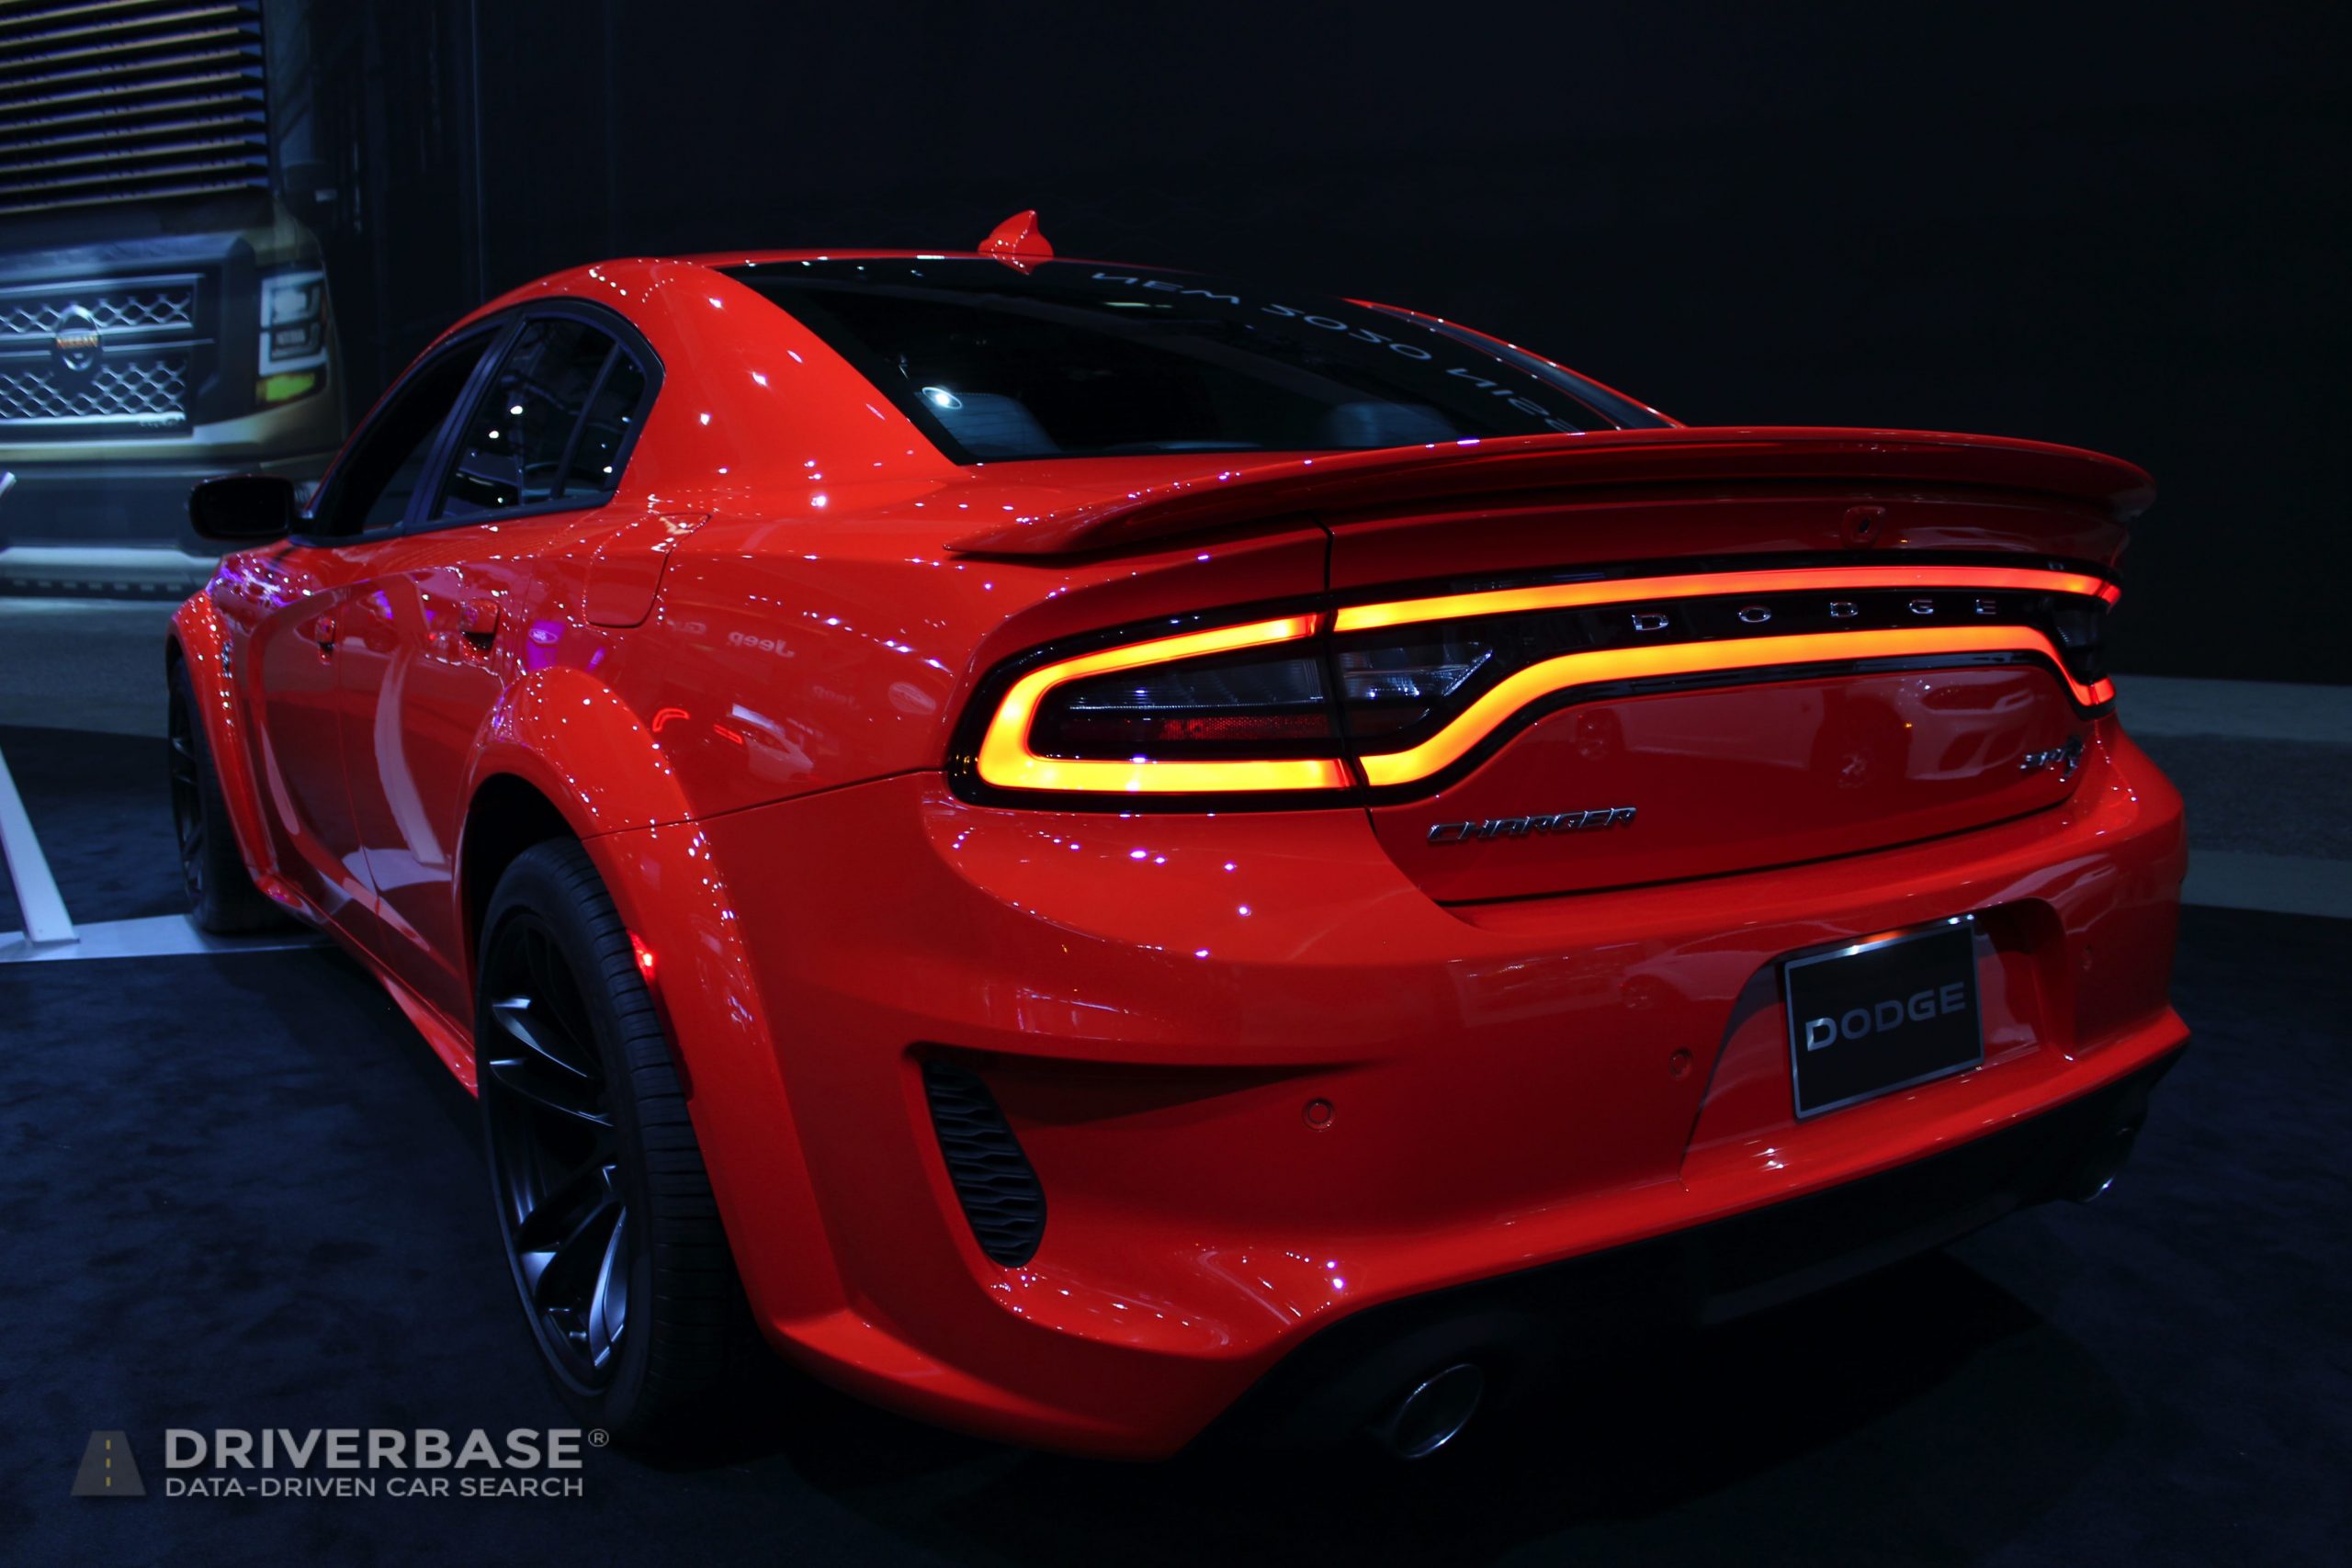 2020 Dodge Charger SRT Hellcat at the 2019 Los Angeles Auto Show